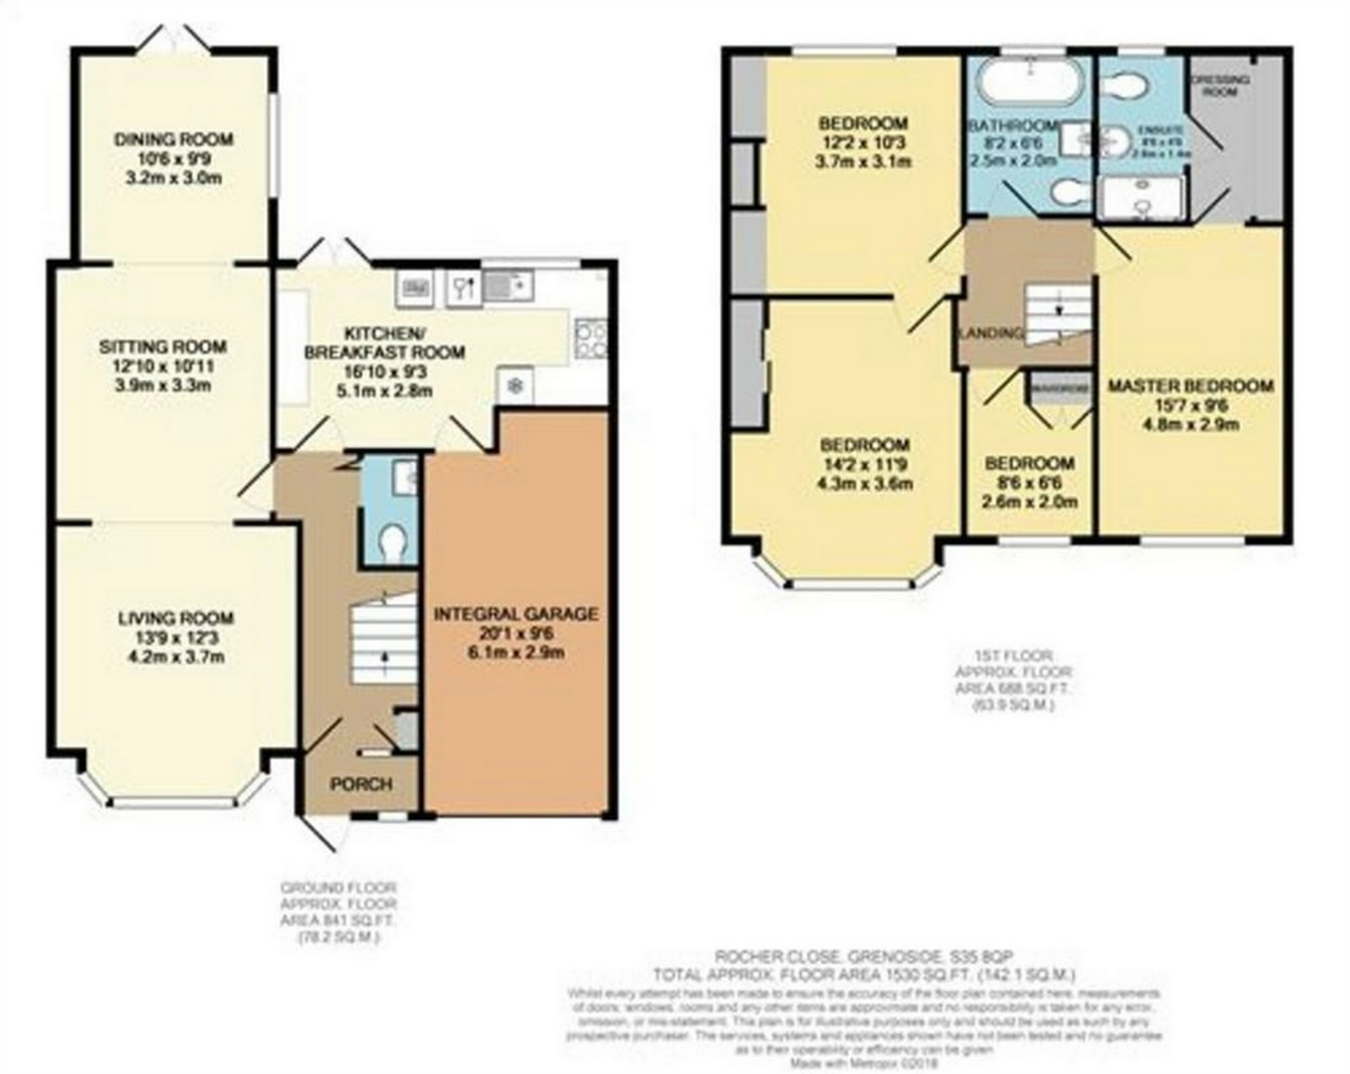 4 Bedrooms Semi-detached house for sale in Rocher Close, Grenoside, Sheffield, South Yorkshire S35